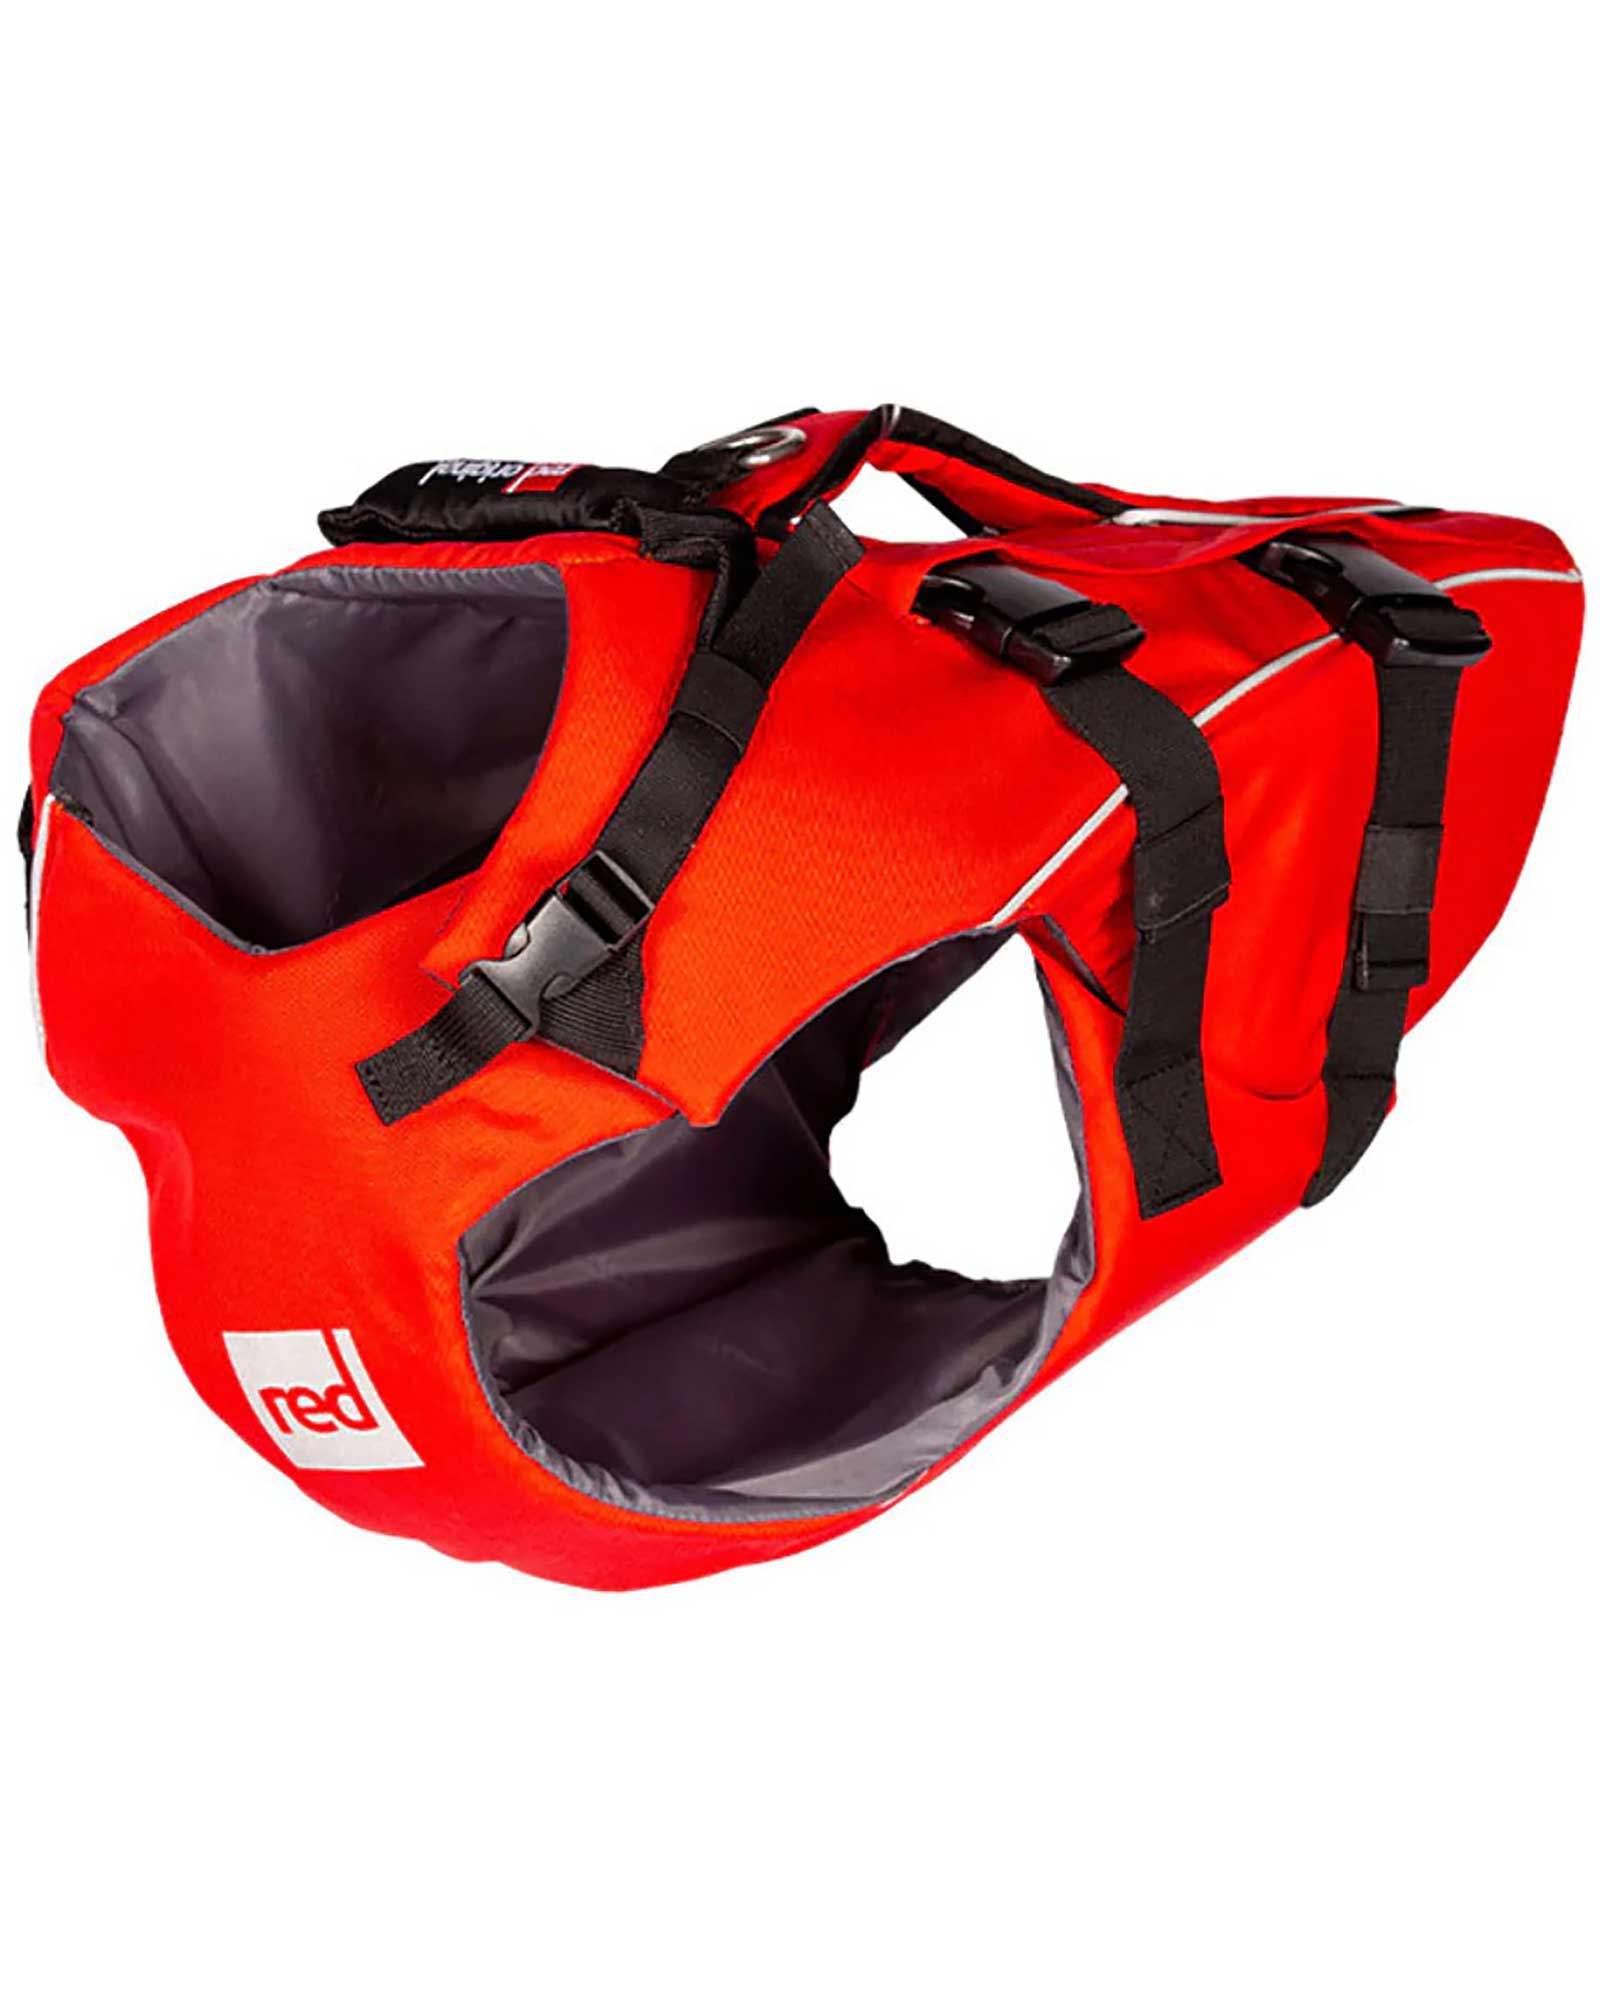 Red Paddle Co Dog Pfd - Small